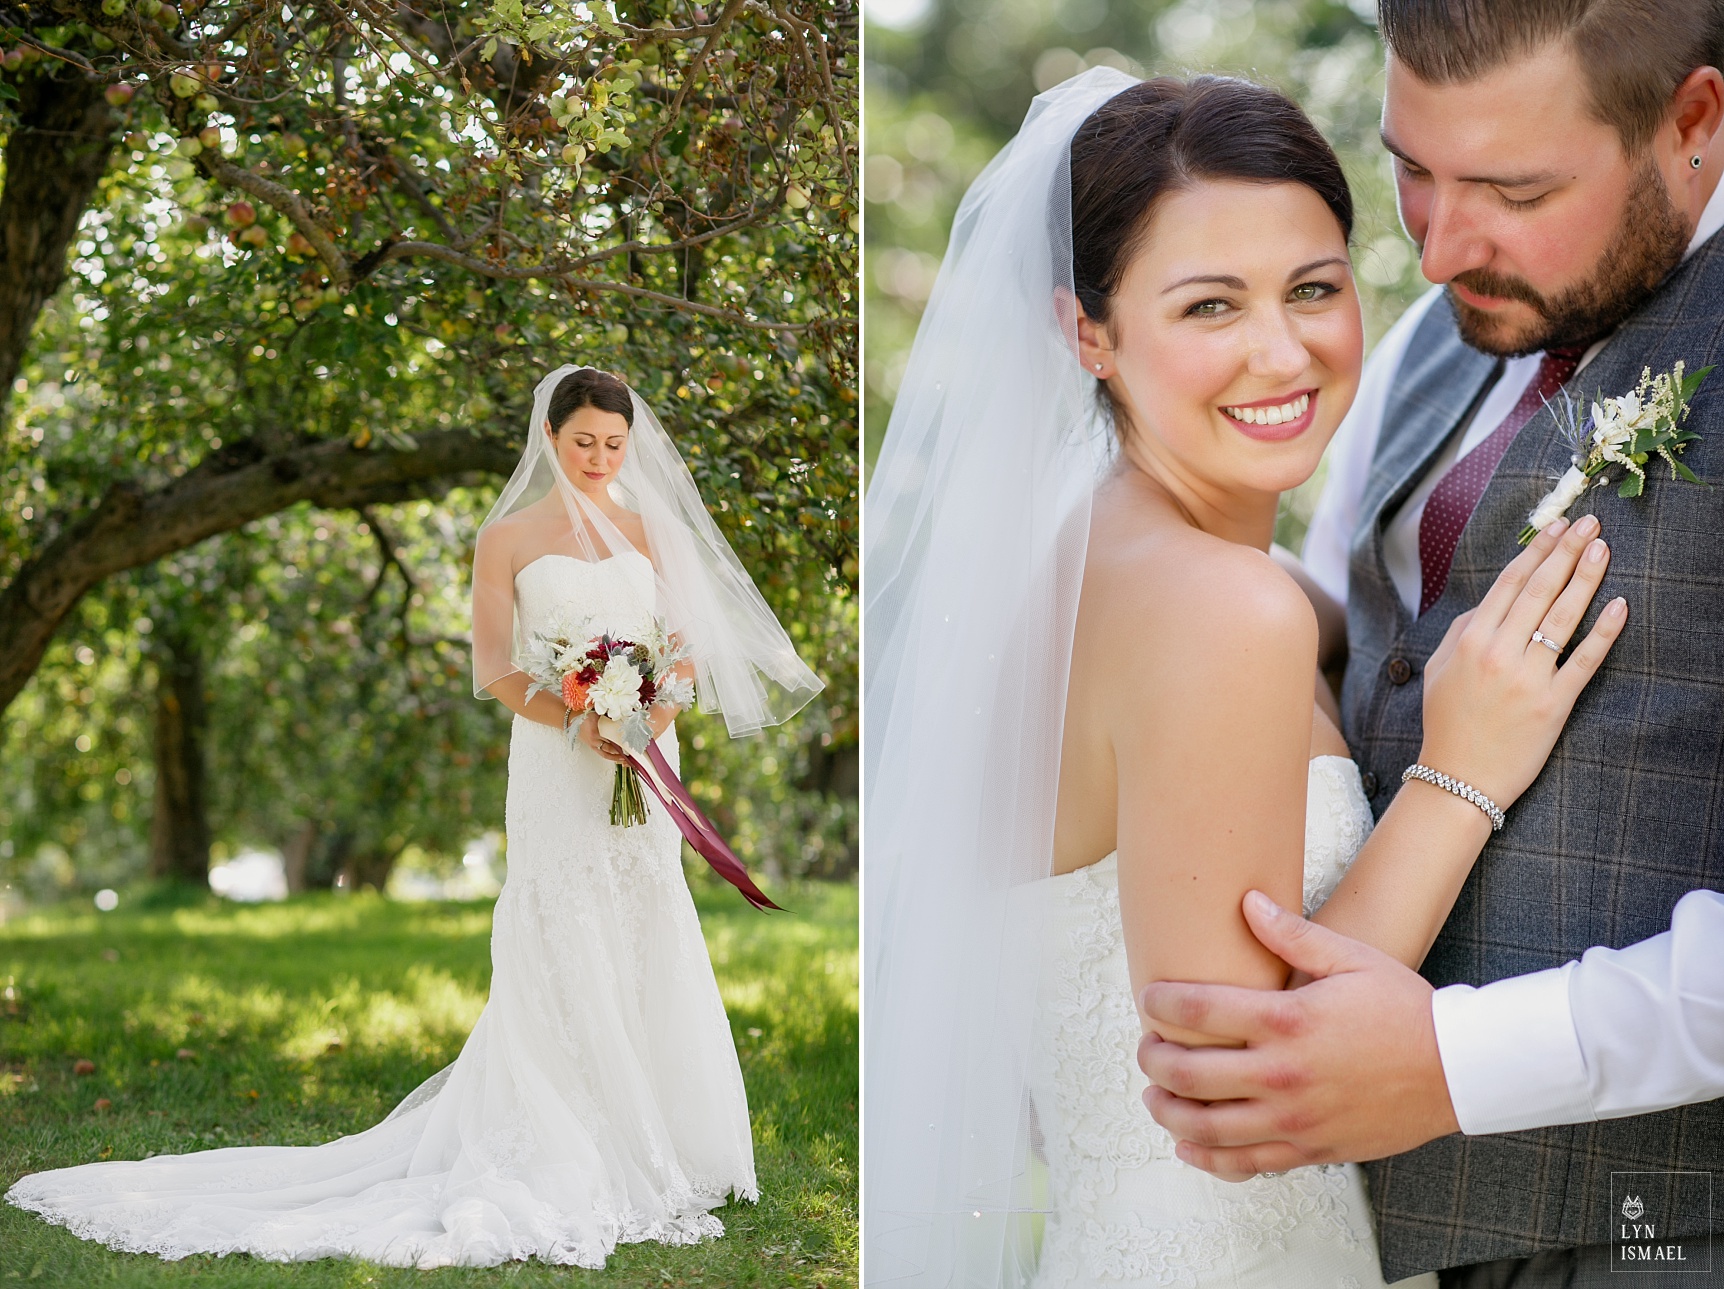 Wedding photos at Steckle Heritage Farms' apple orchard